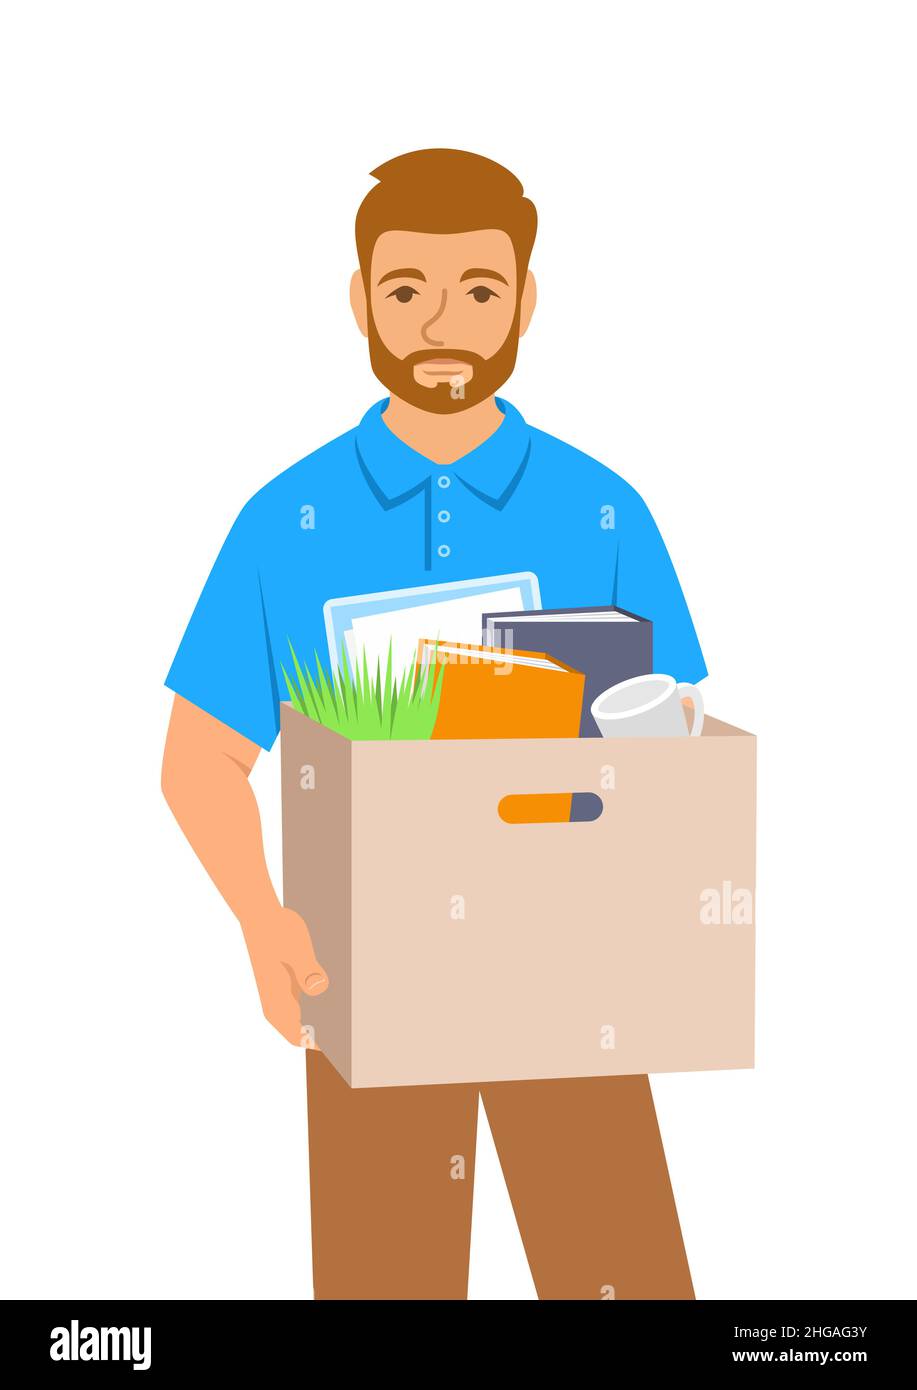 Unemployed fired young man. Sad jobless office worker holds box with personal stuff. Unhappy upset face worried about job loss. Unemployment during th Stock Vector